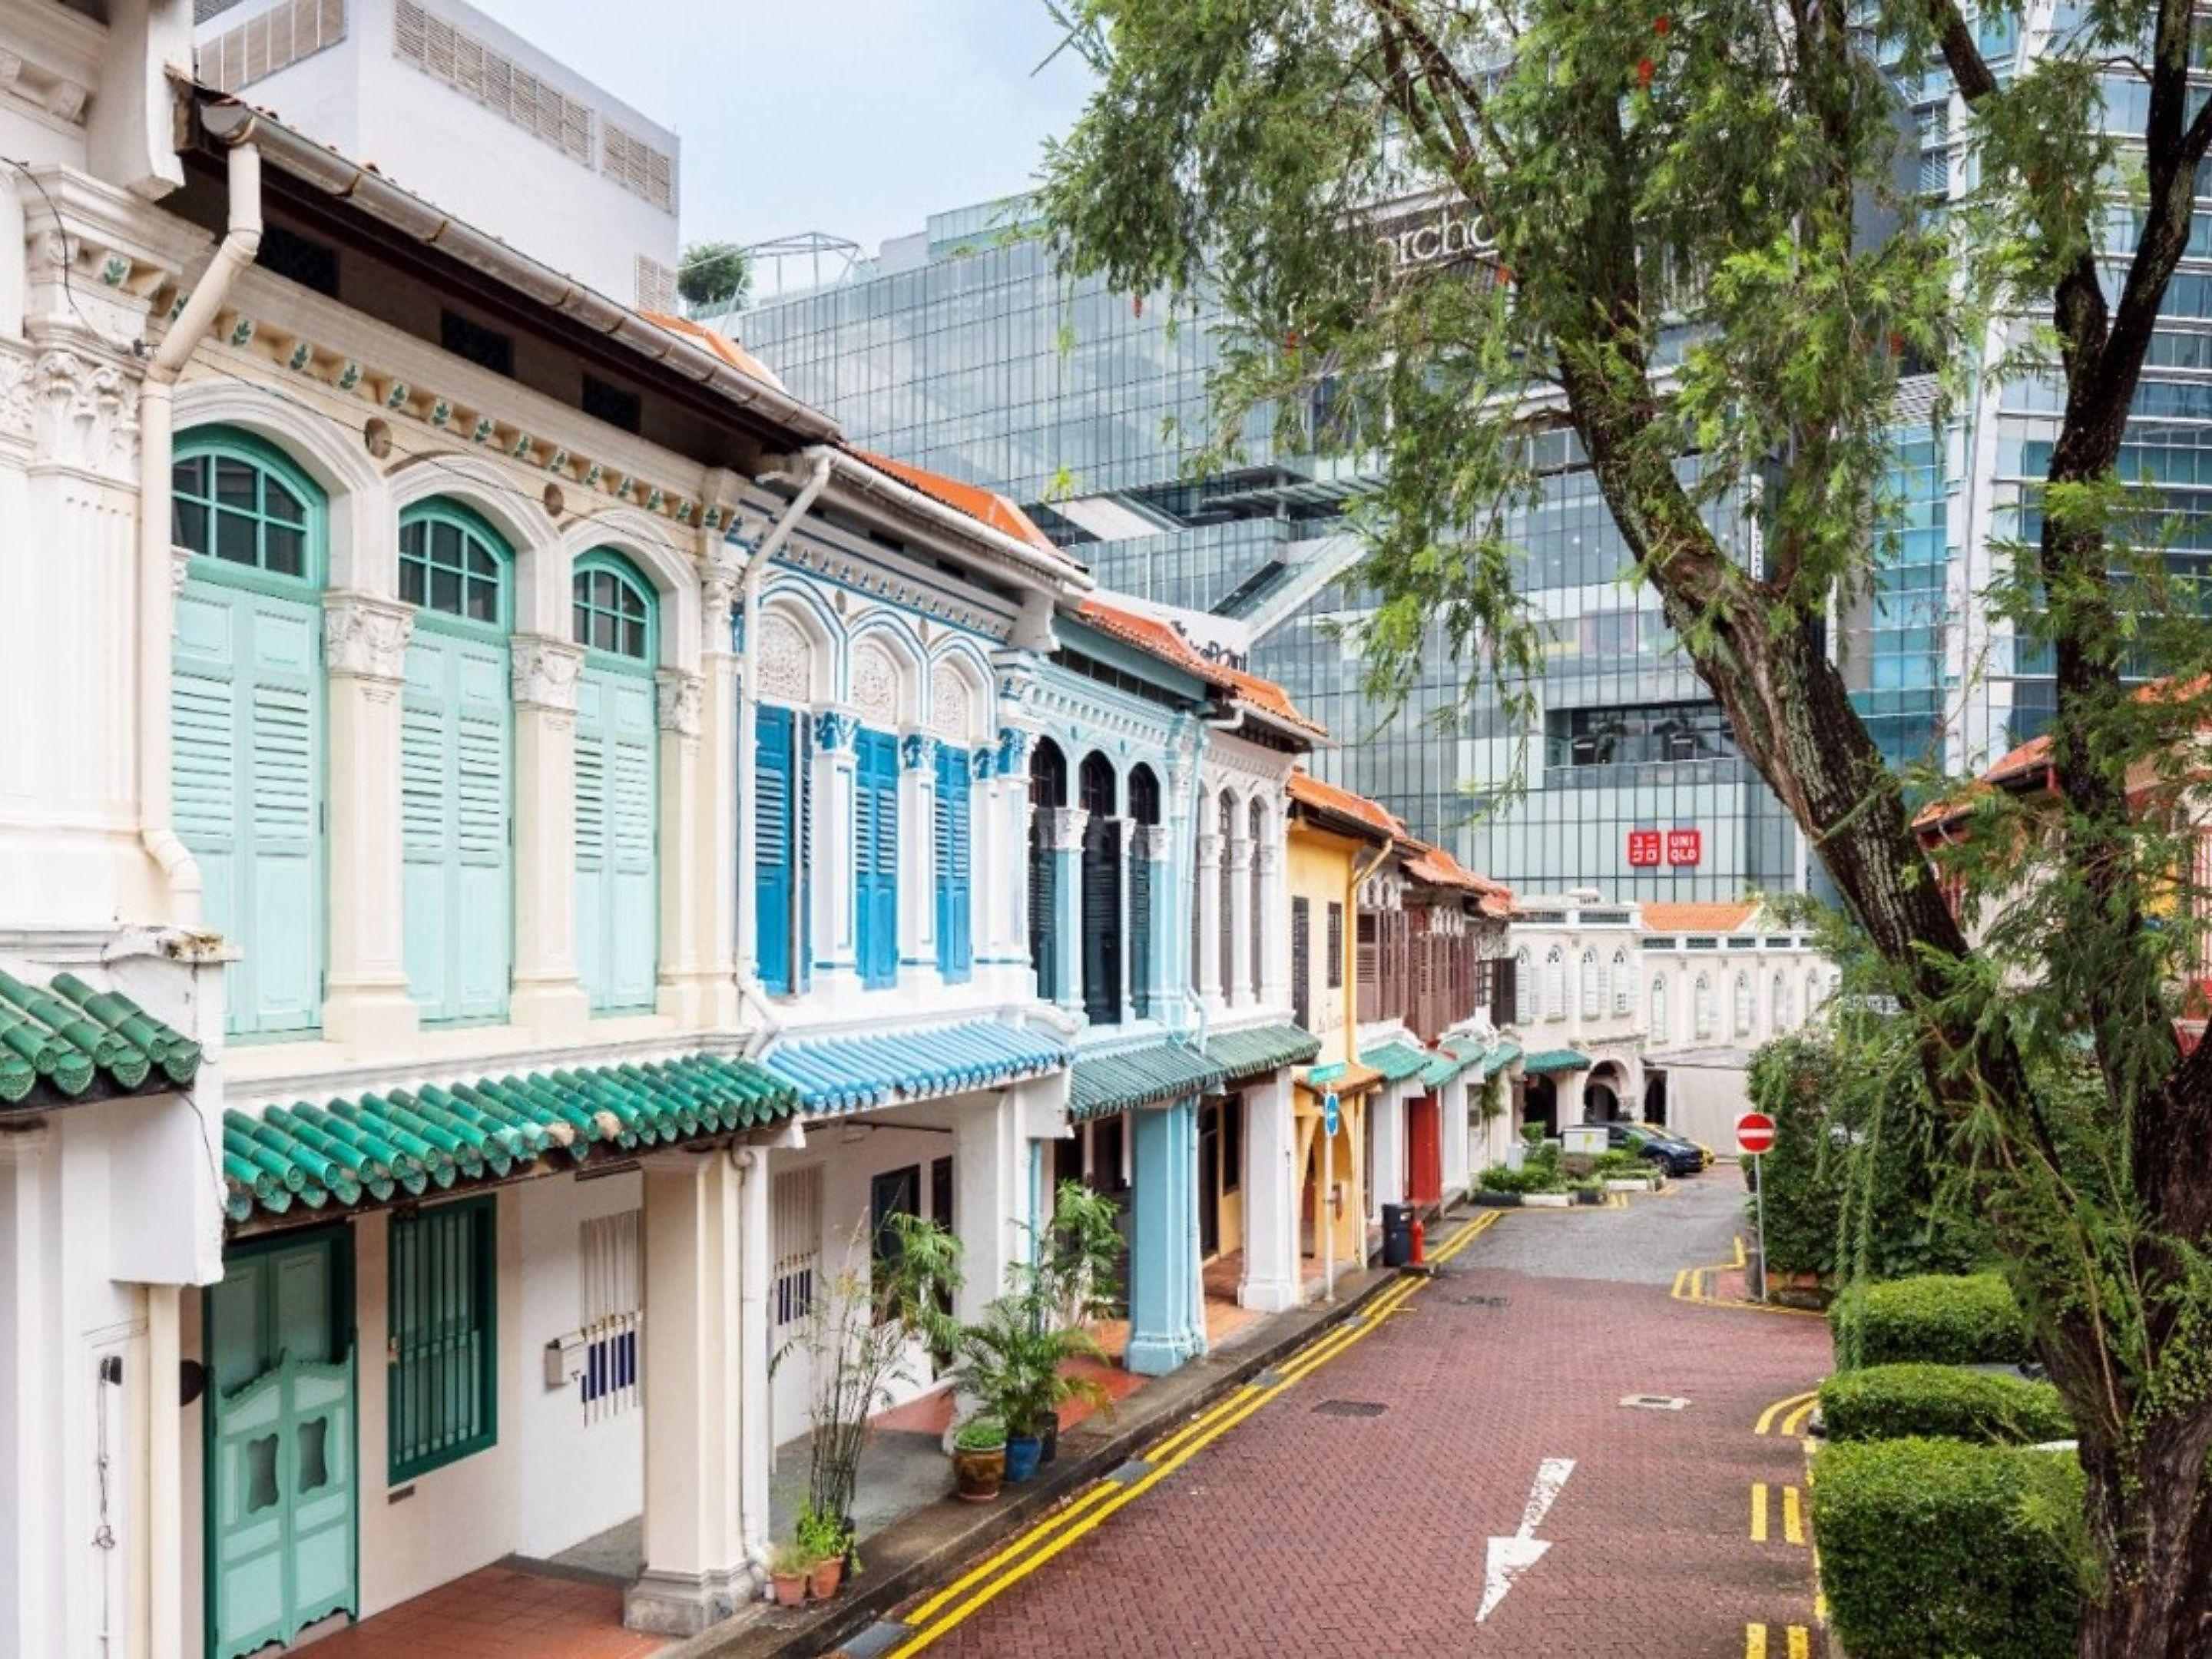 Emerald Hill conservation shophouses is only a short walk away